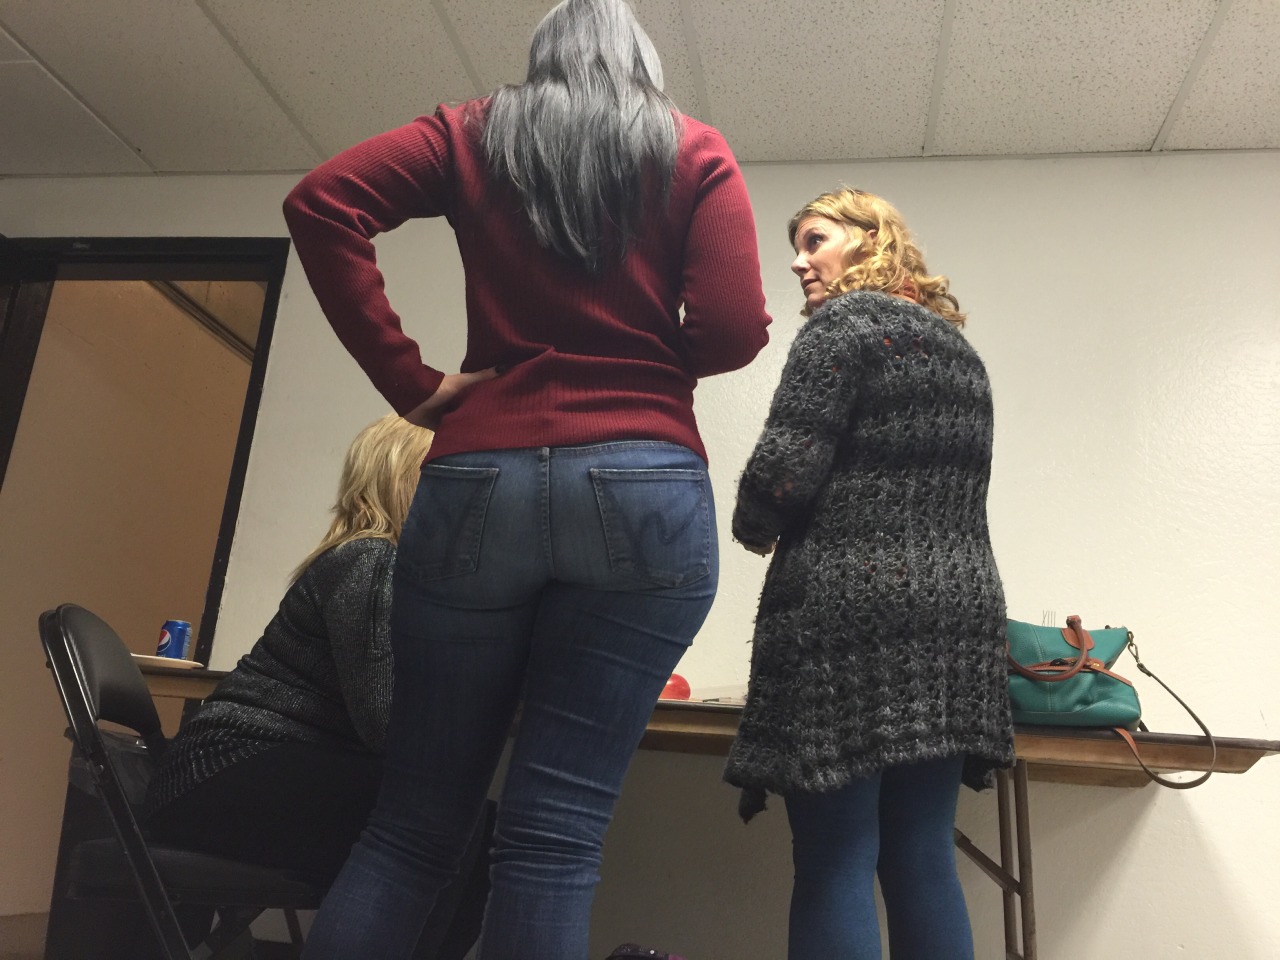 Midwestcreepin Creepshots Love A Nice Office Cake Thanks For Creeping And Submitting Creepshot